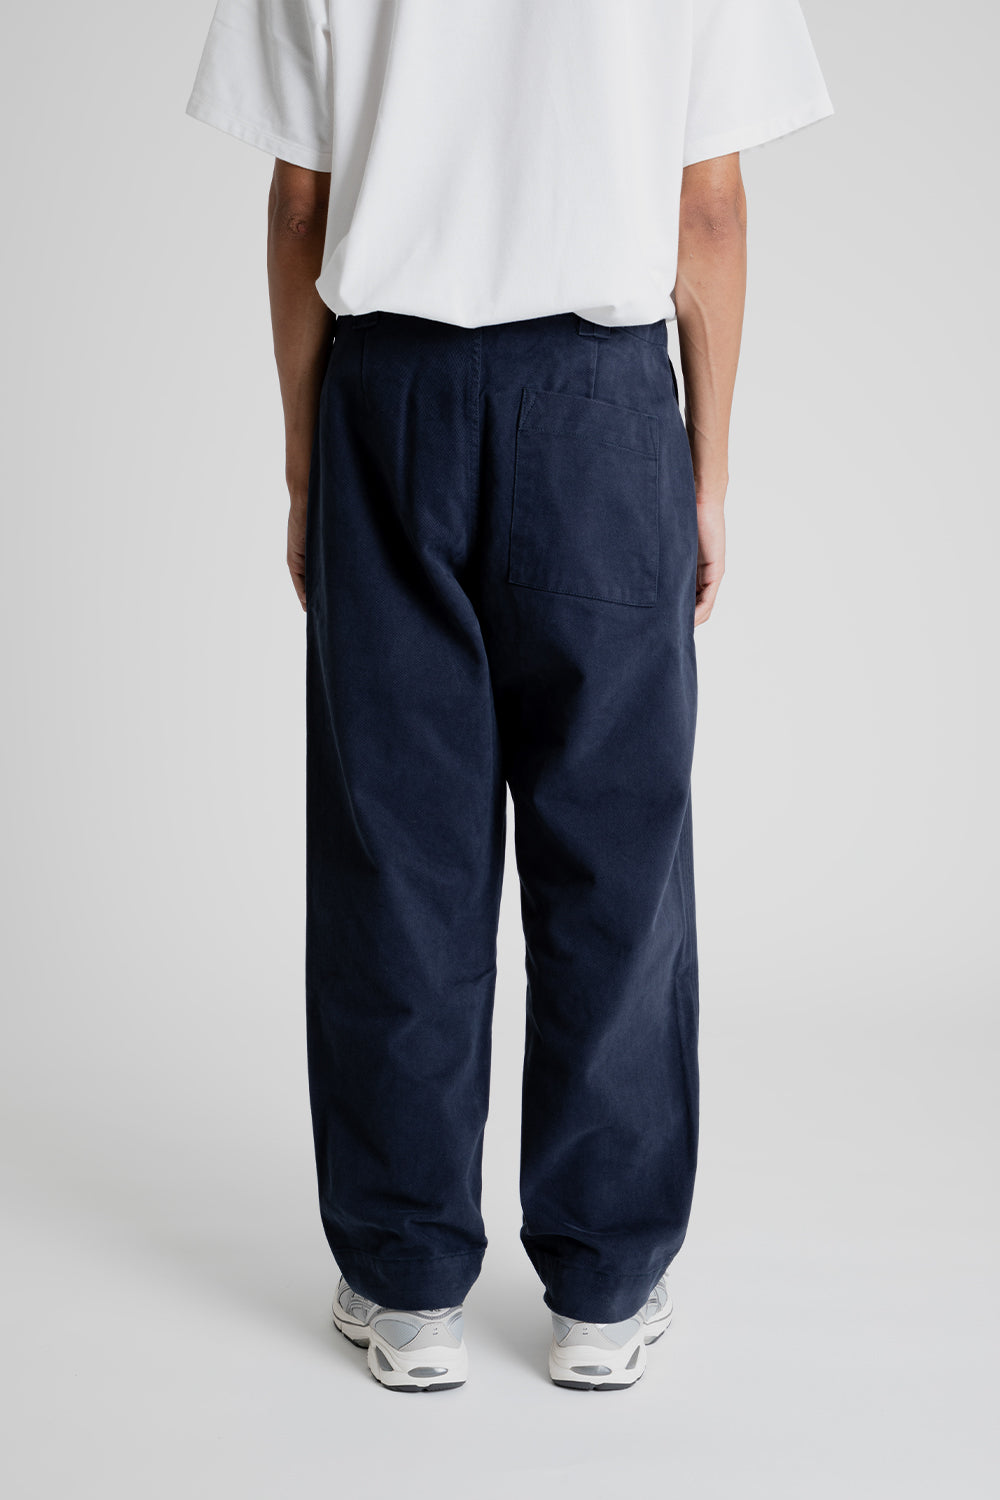 Parages Dad Pants in Navy